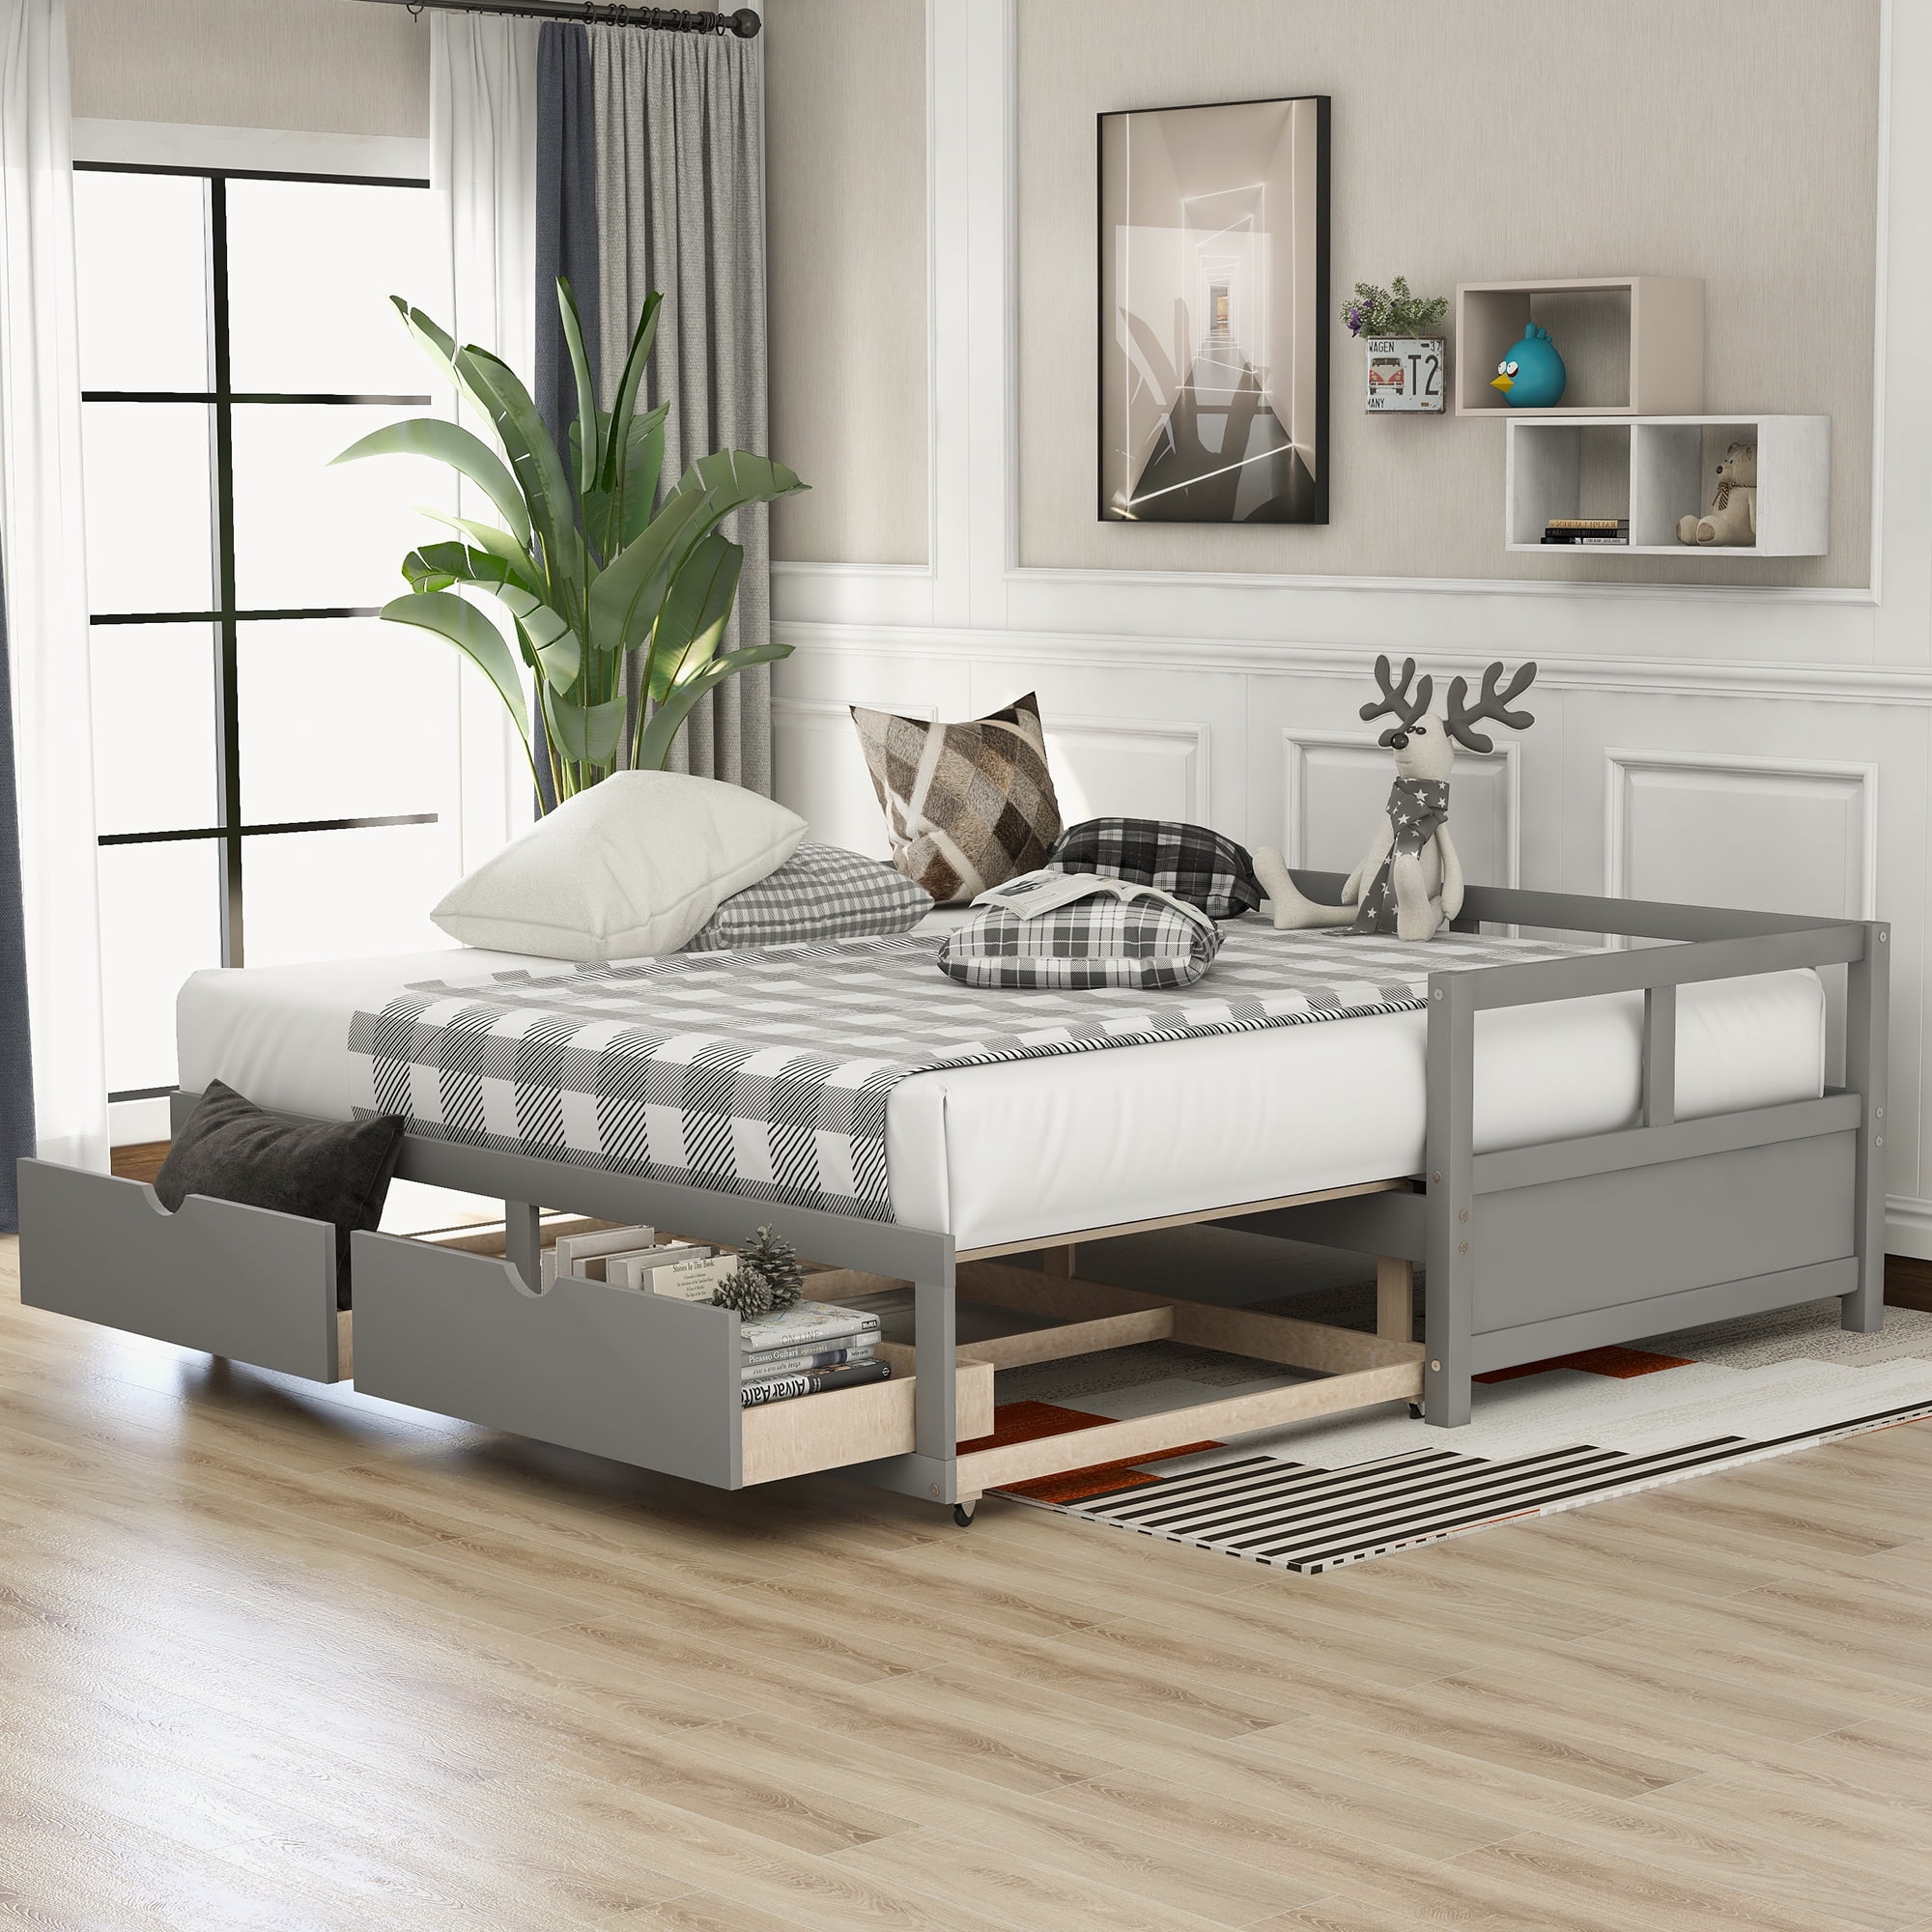 Twin Daybed With Trundle Bed And Two, Trundle Bed Frame Hardware